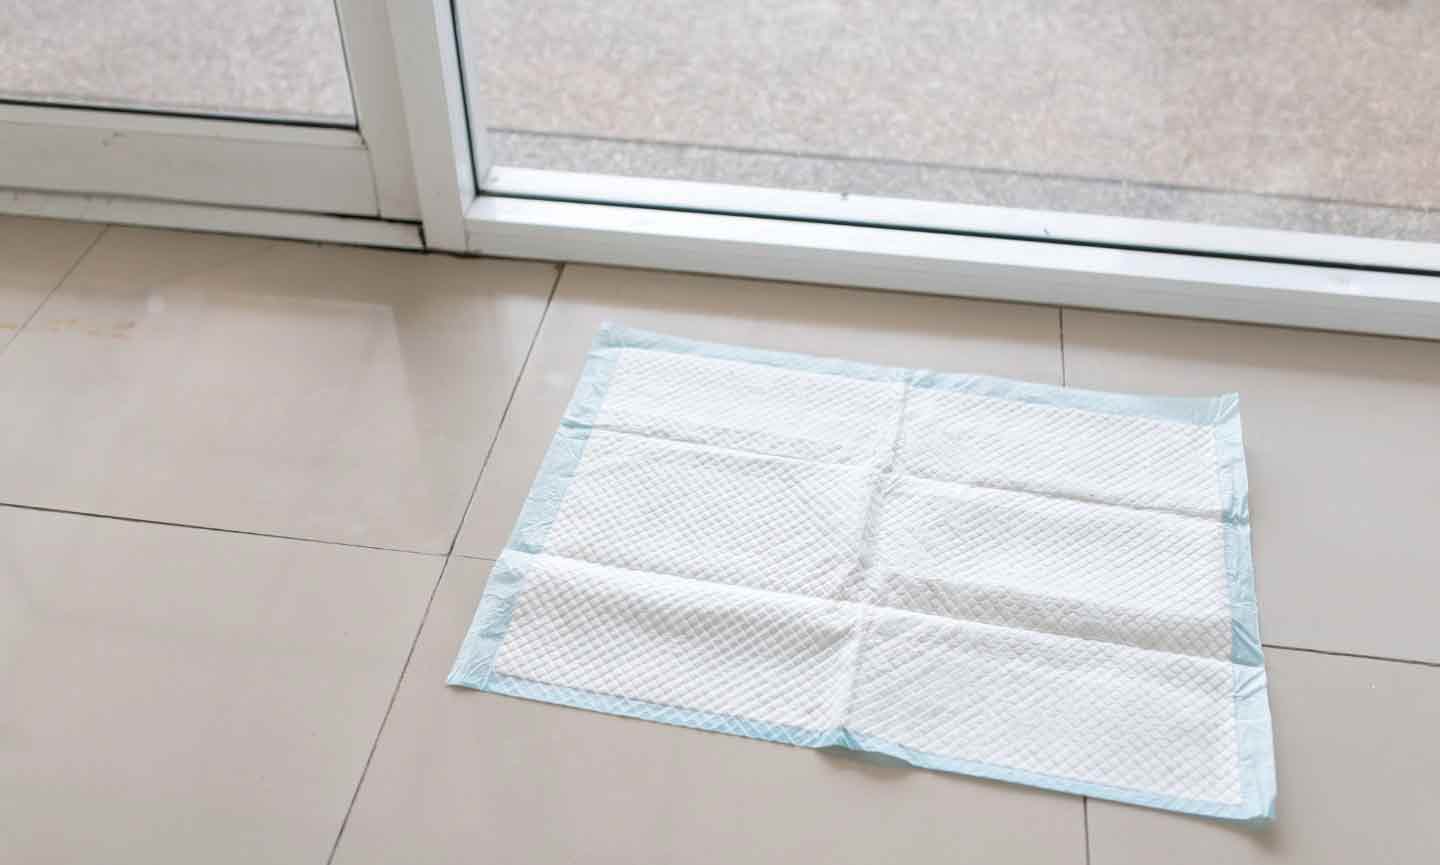 A dog pee pad laying on the tile floor in front of a sliding glass door.